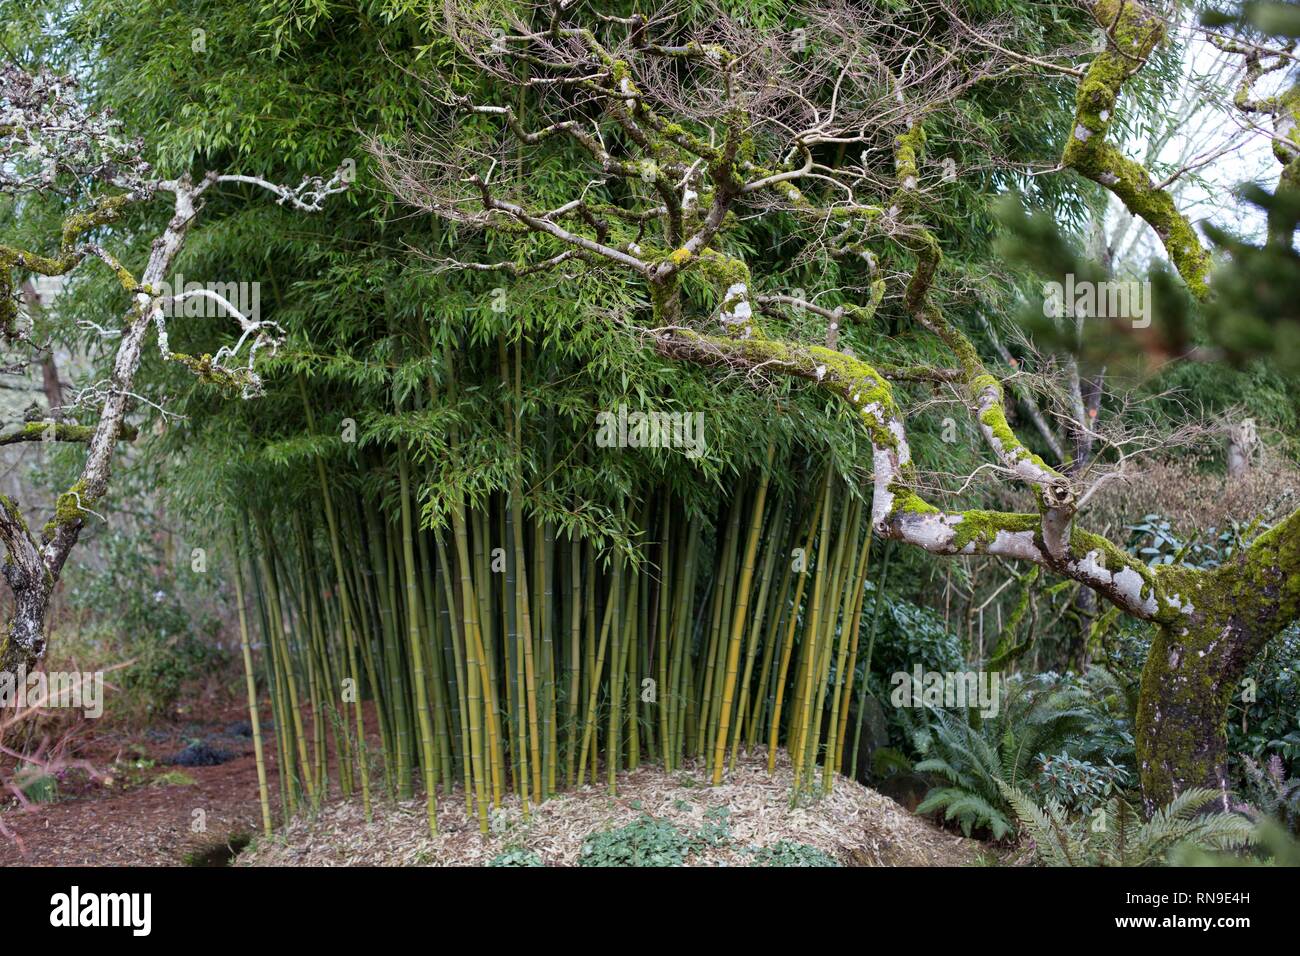 Tall bamboo plants in a garden in Eugene, Oregon, USA. Stock Photo